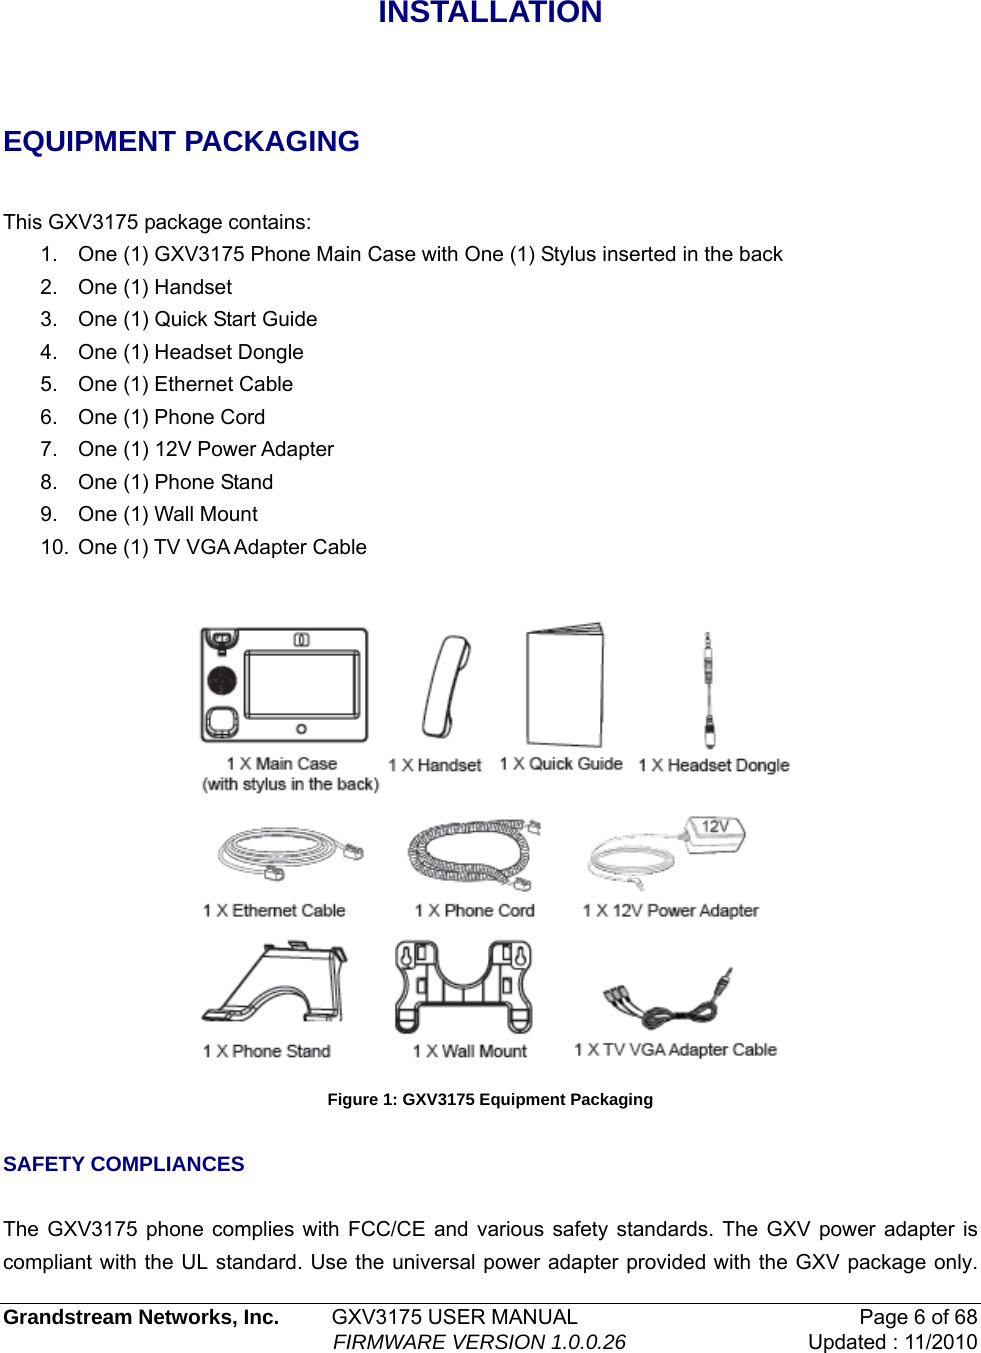 INSTALLATION  EQUIPMENT PACKAGING  This GXV3175 package contains: 1.  One (1) GXV3175 Phone Main Case with One (1) Stylus inserted in the back 2.  One (1) Handset 3.  One (1) Quick Start Guide 4.  One (1) Headset Dongle 5.  One (1) Ethernet Cable 6.  One (1) Phone Cord  7.  One (1) 12V Power Adapter 8.  One (1) Phone Stand 9.  One (1) Wall Mount 10.  One (1) TV VGA Adapter Cable   Figure 1: GXV3175 Equipment Packaging  SAFETY COMPLIANCES   The GXV3175 phone complies with FCC/CE and various safety standards. The GXV power adapter is compliant with the UL standard. Use the universal power adapter provided with the GXV package only.  Grandstream Networks, Inc.         GXV3175 USER MANUAL  Page 6 of 68                                                          FIRMWARE VERSION 1.0.0.26  Updated : 11/2010    